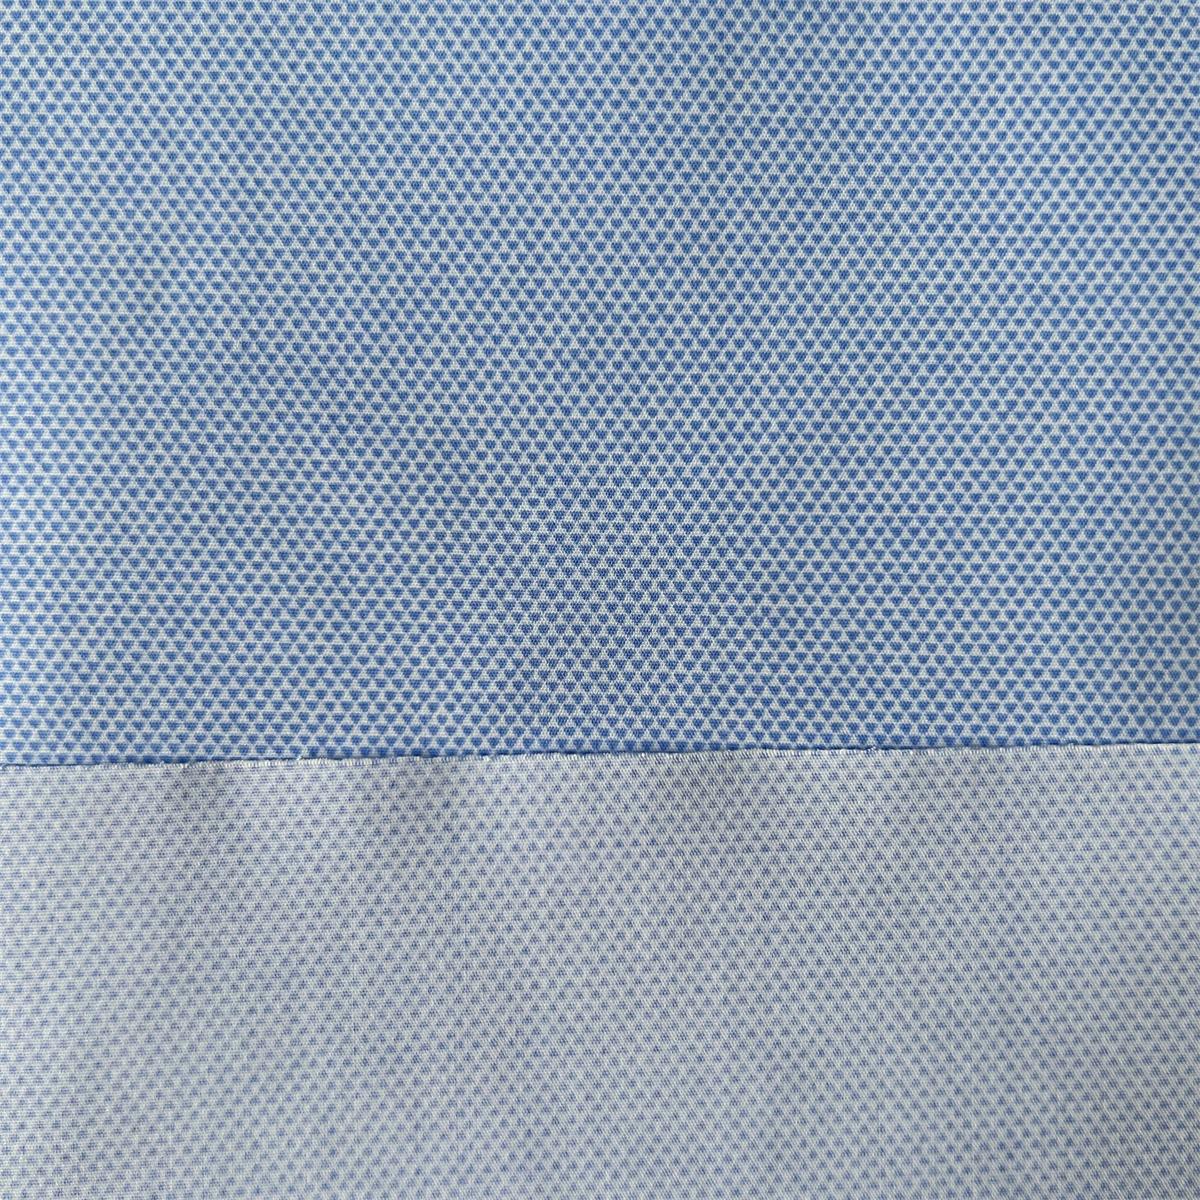 Shirts Fabric Manufacturer in China soft comfortable printed bamboo polyester spandex woven shirt fabric for mens casual shirts